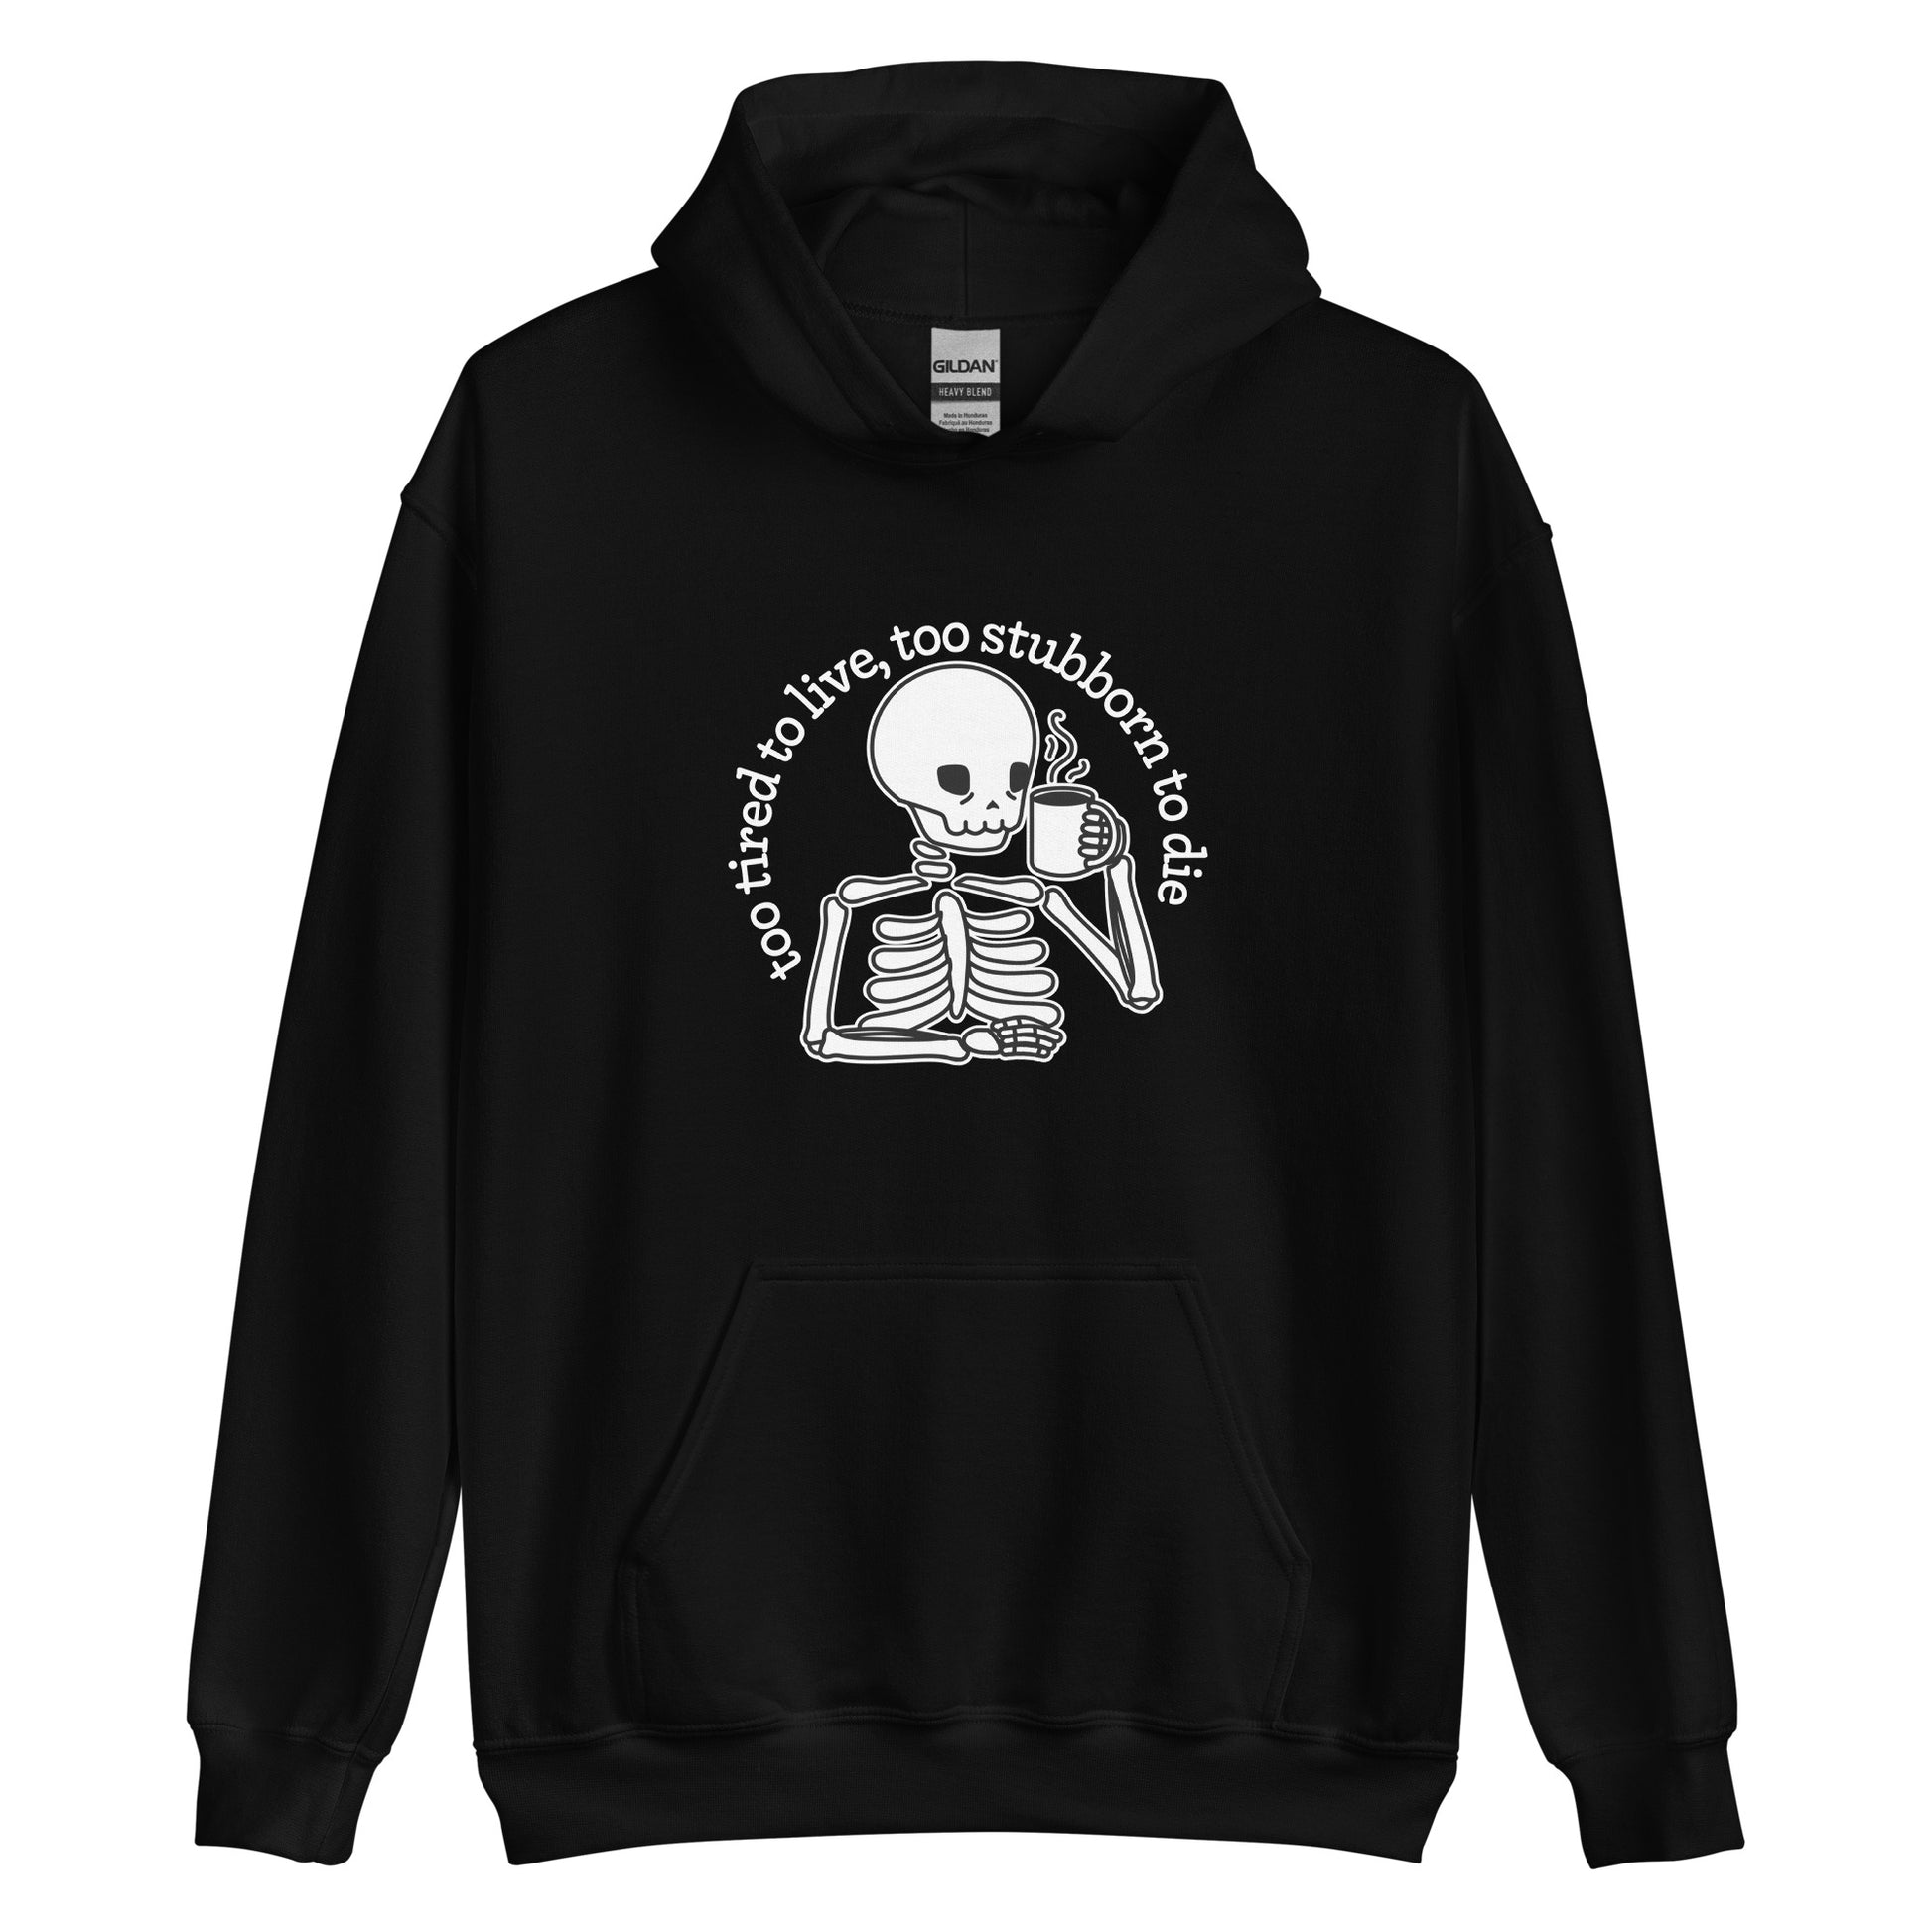 A black hooded sweatshirt featuring an illustration of a tired-looking skeleton holding a steaming mug. Text in an arc above the skeleton reads "too tired to live, too stubborn to die"